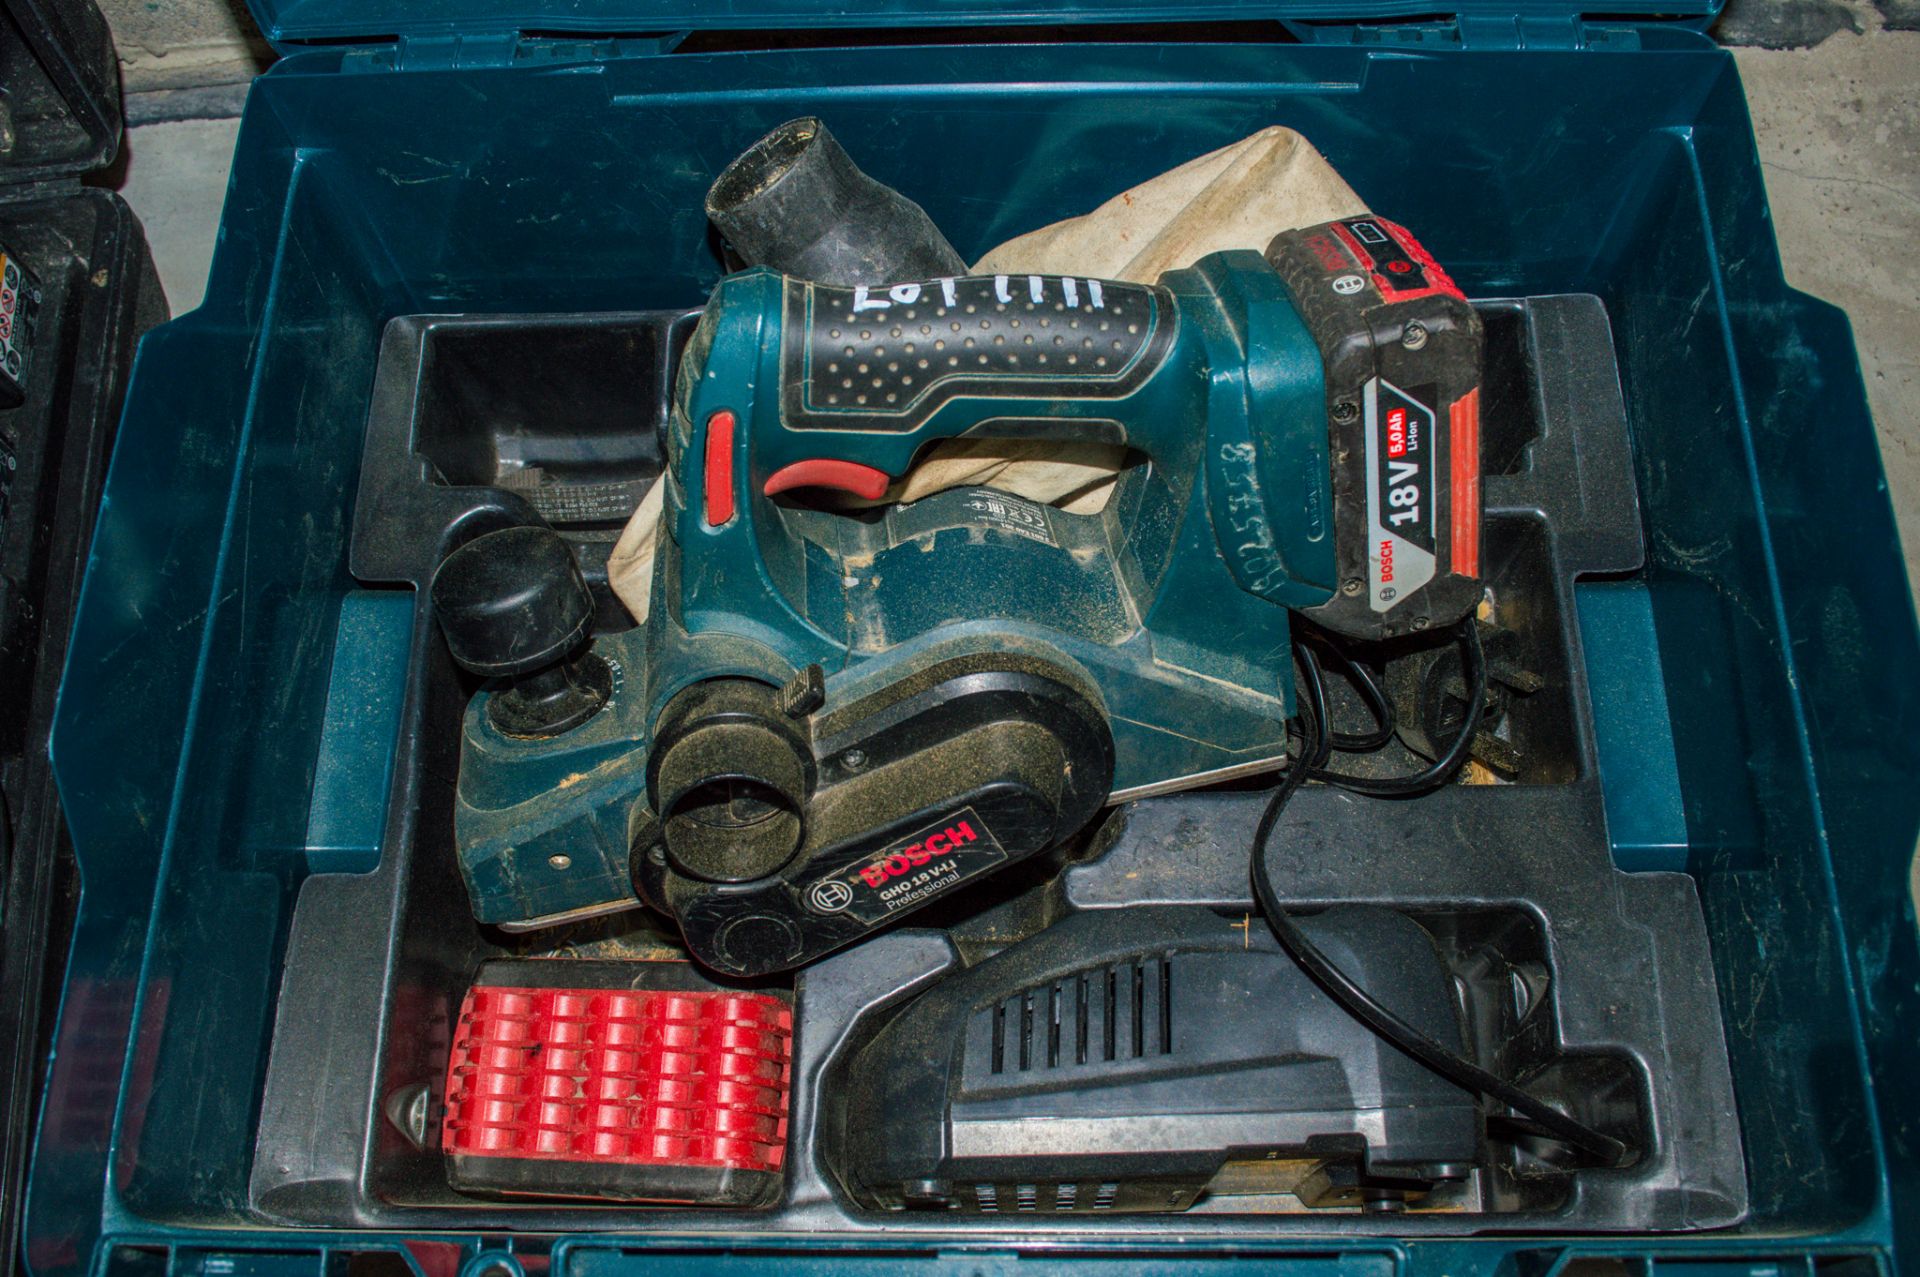 Bosch 18v cordless planer c/w battery, charger and carry case 9025758